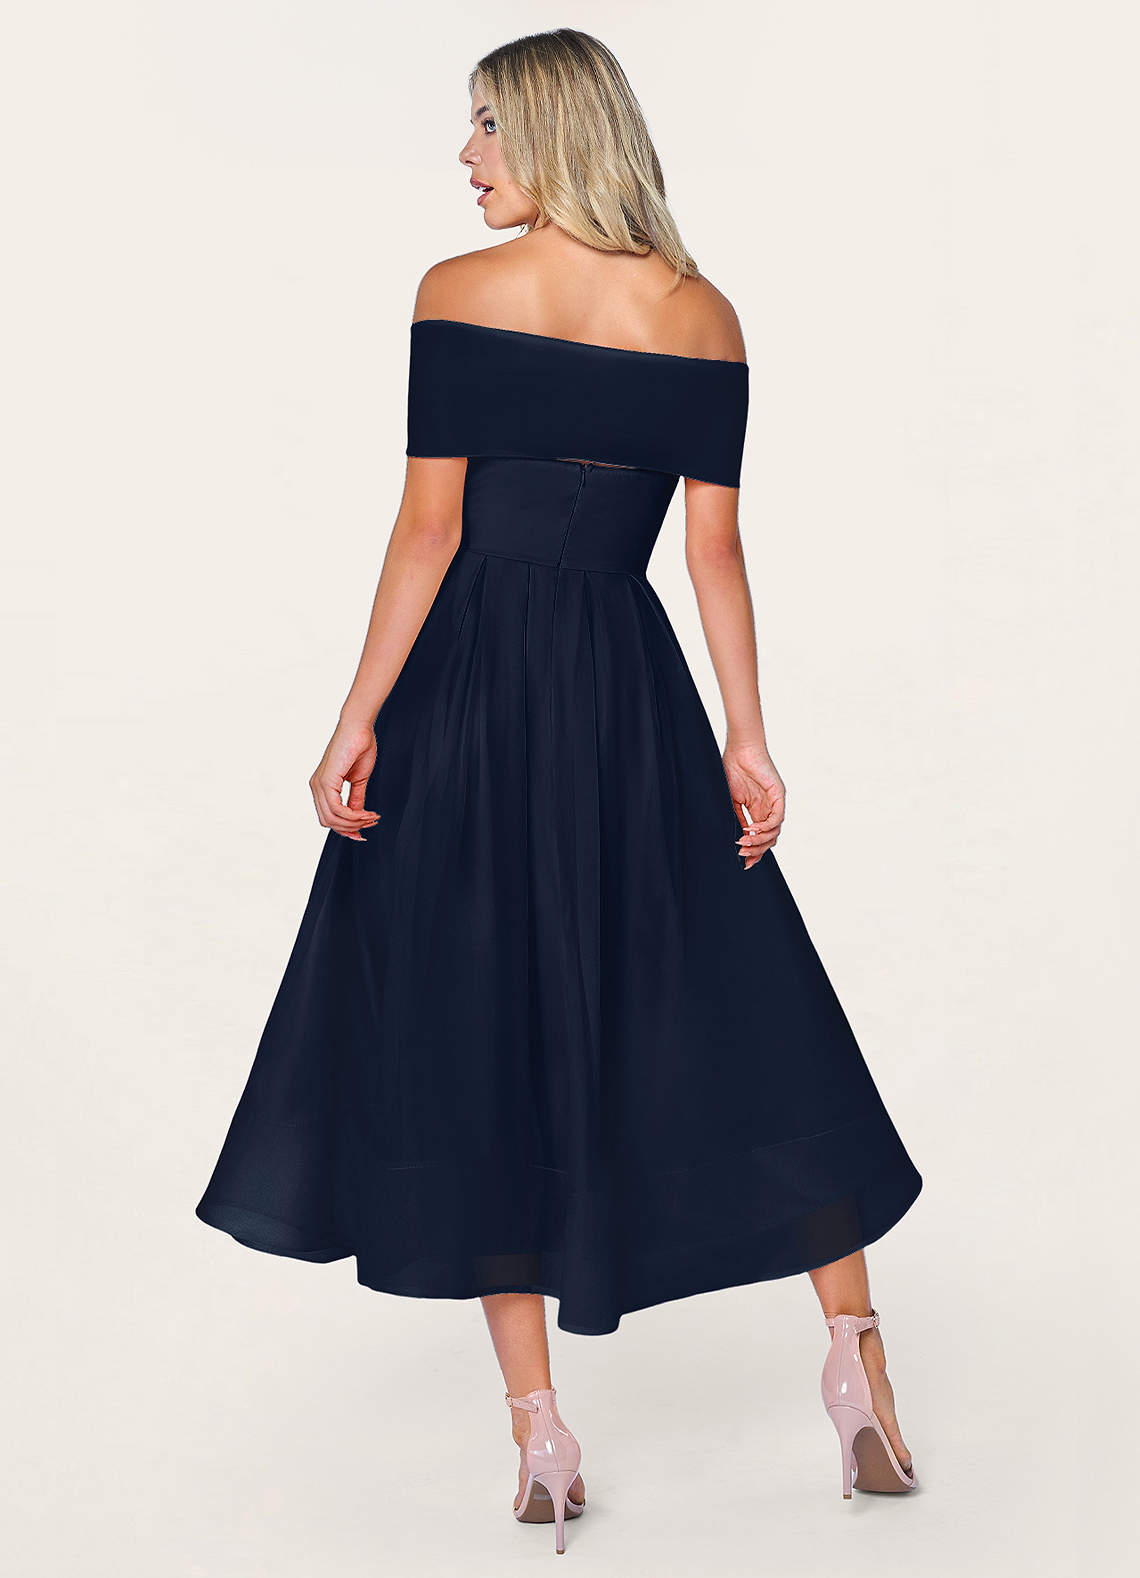 Dear To My Heart Navy Blue Off-The-Shoulder Midi Dress image1